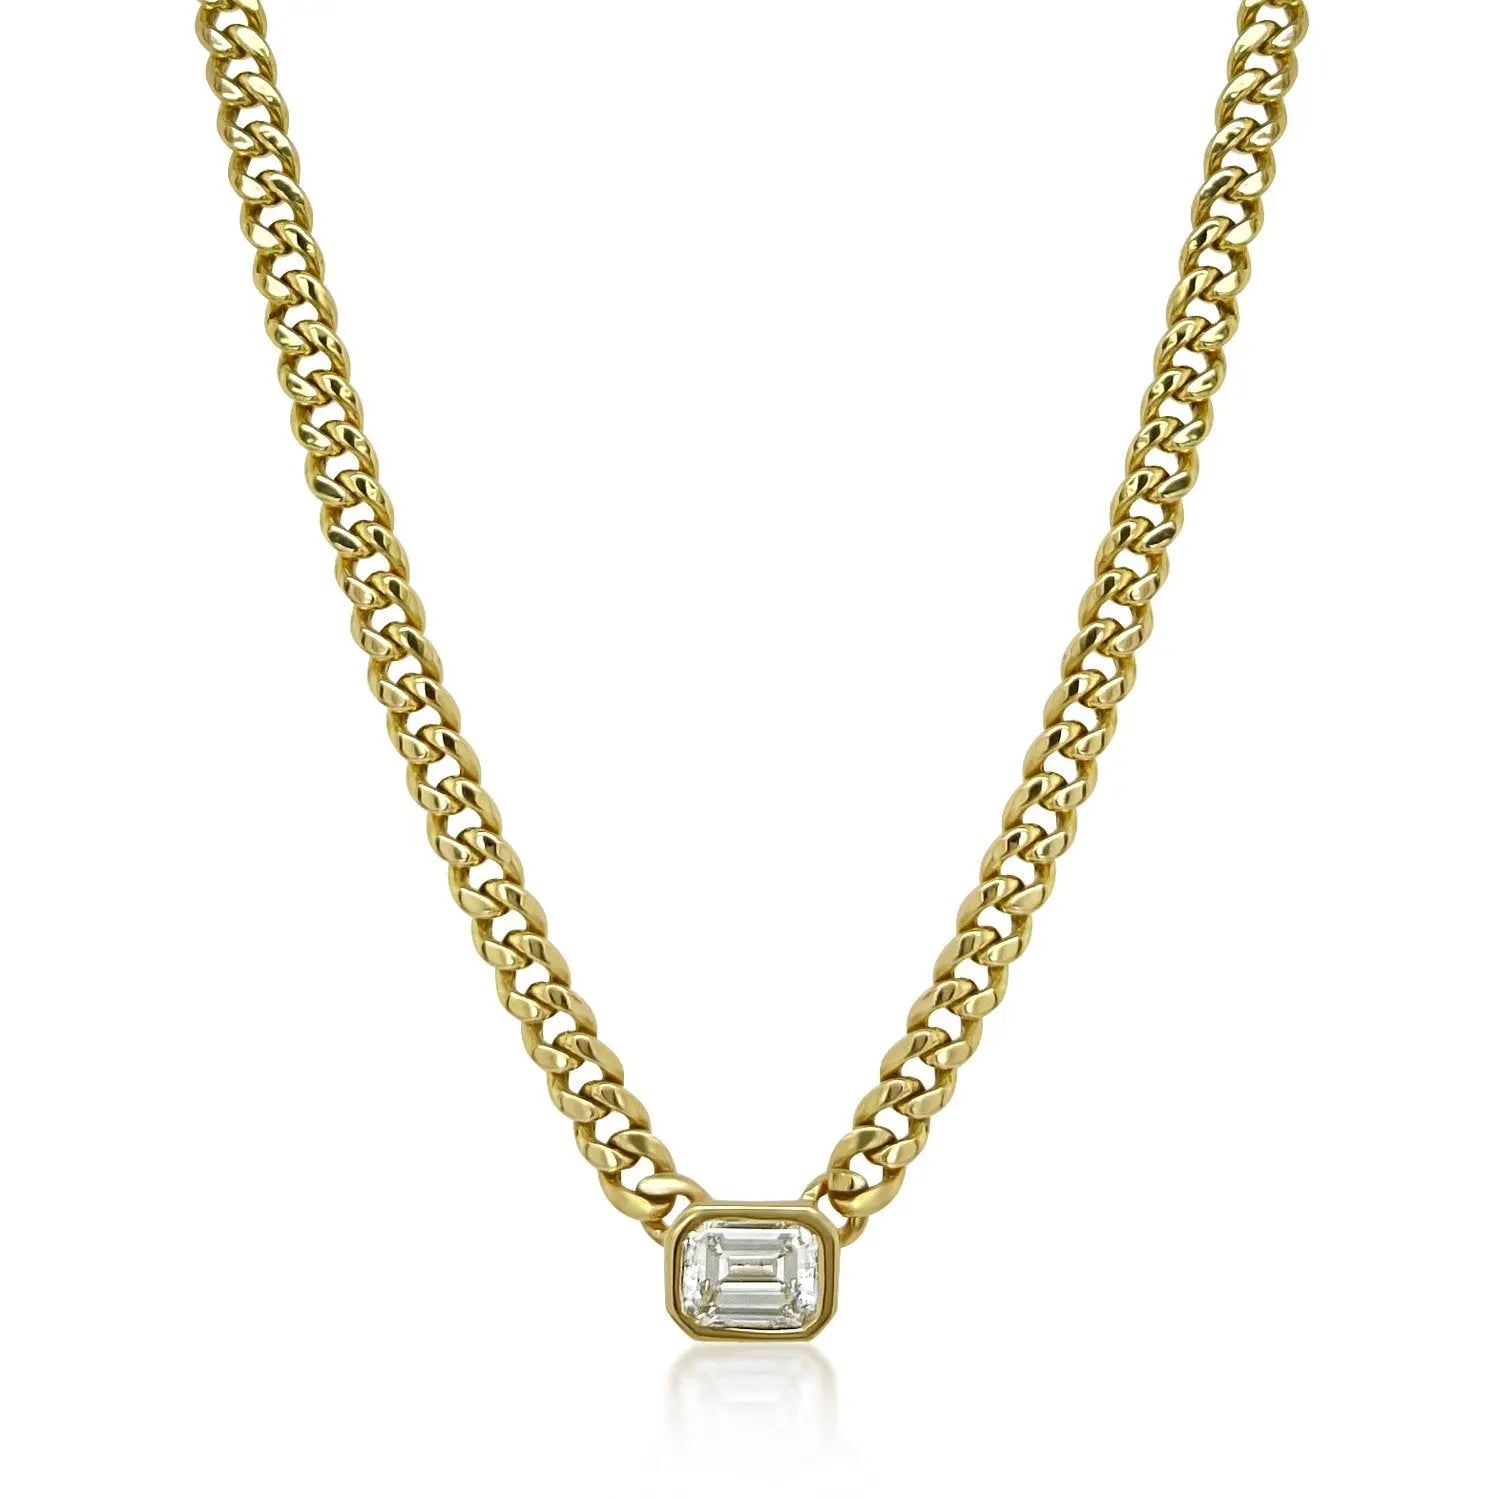 14k Yellow Gold Bezel Emerald Diamond Cuban Necklace  Details:  Emerald Diamond 0.48ct. Weight: 4.80 Length: 16" If an item is out of stock, please allow 6-8 weeks for delivery